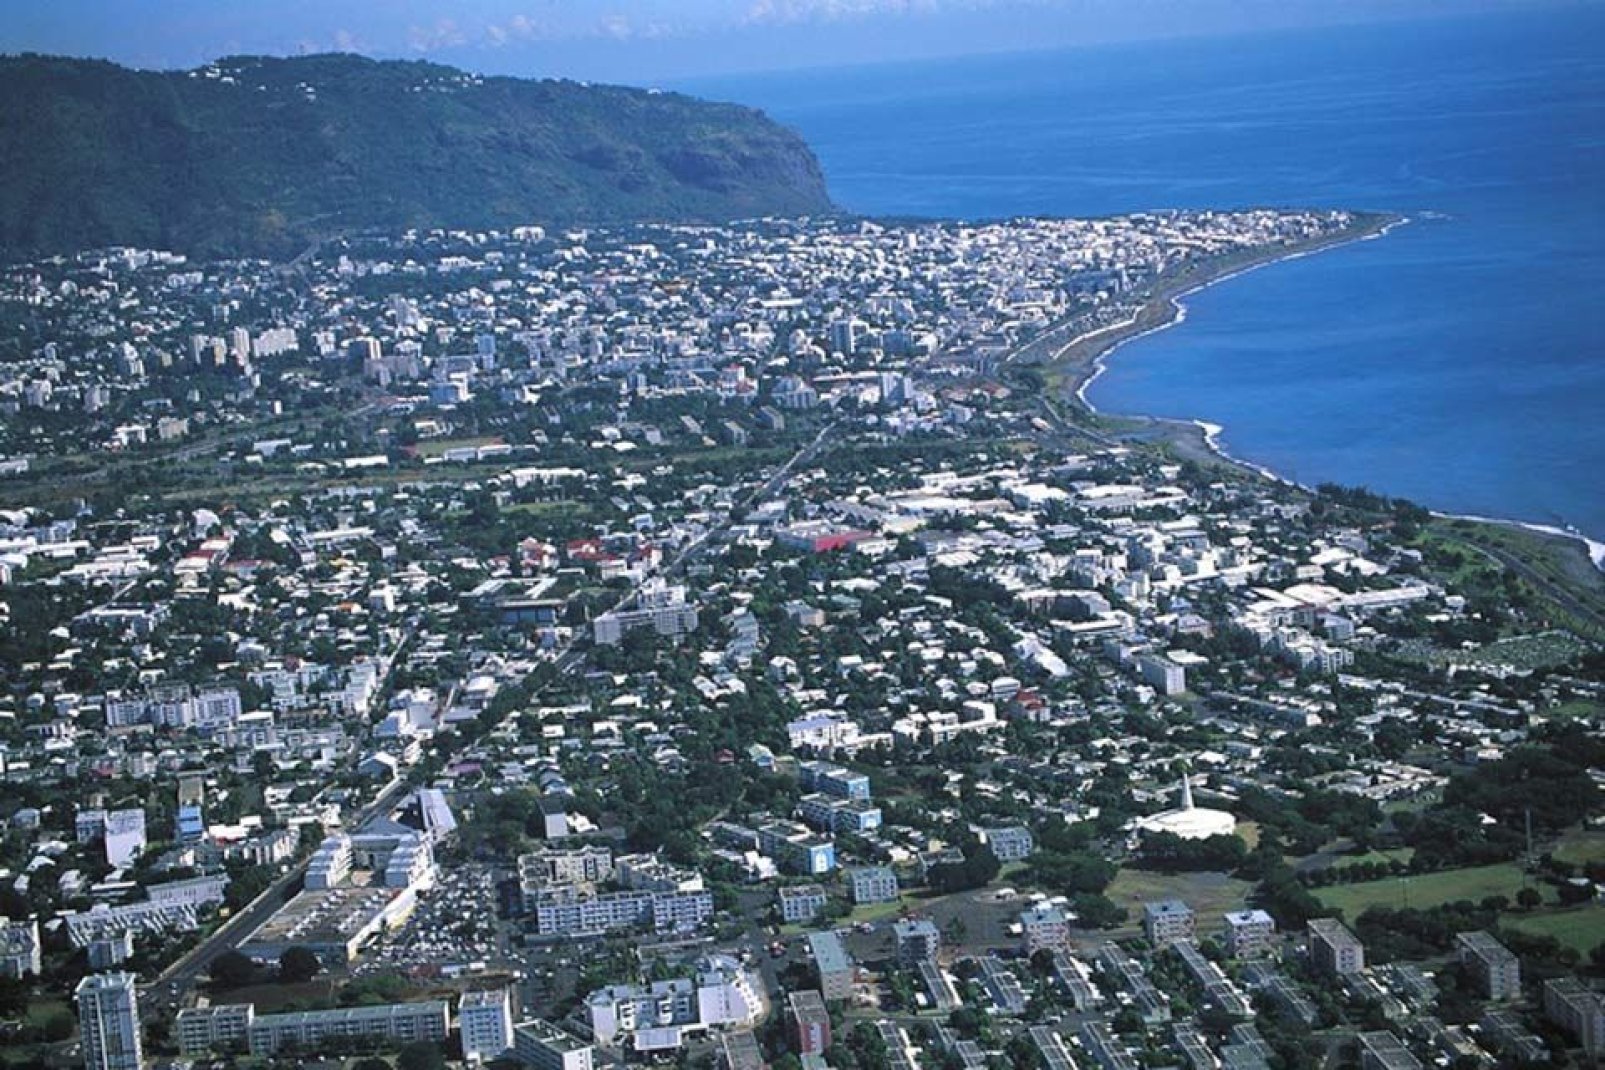 The administrative centre and capital of the department of Réunion Island attracts little more than a handful of tourists.